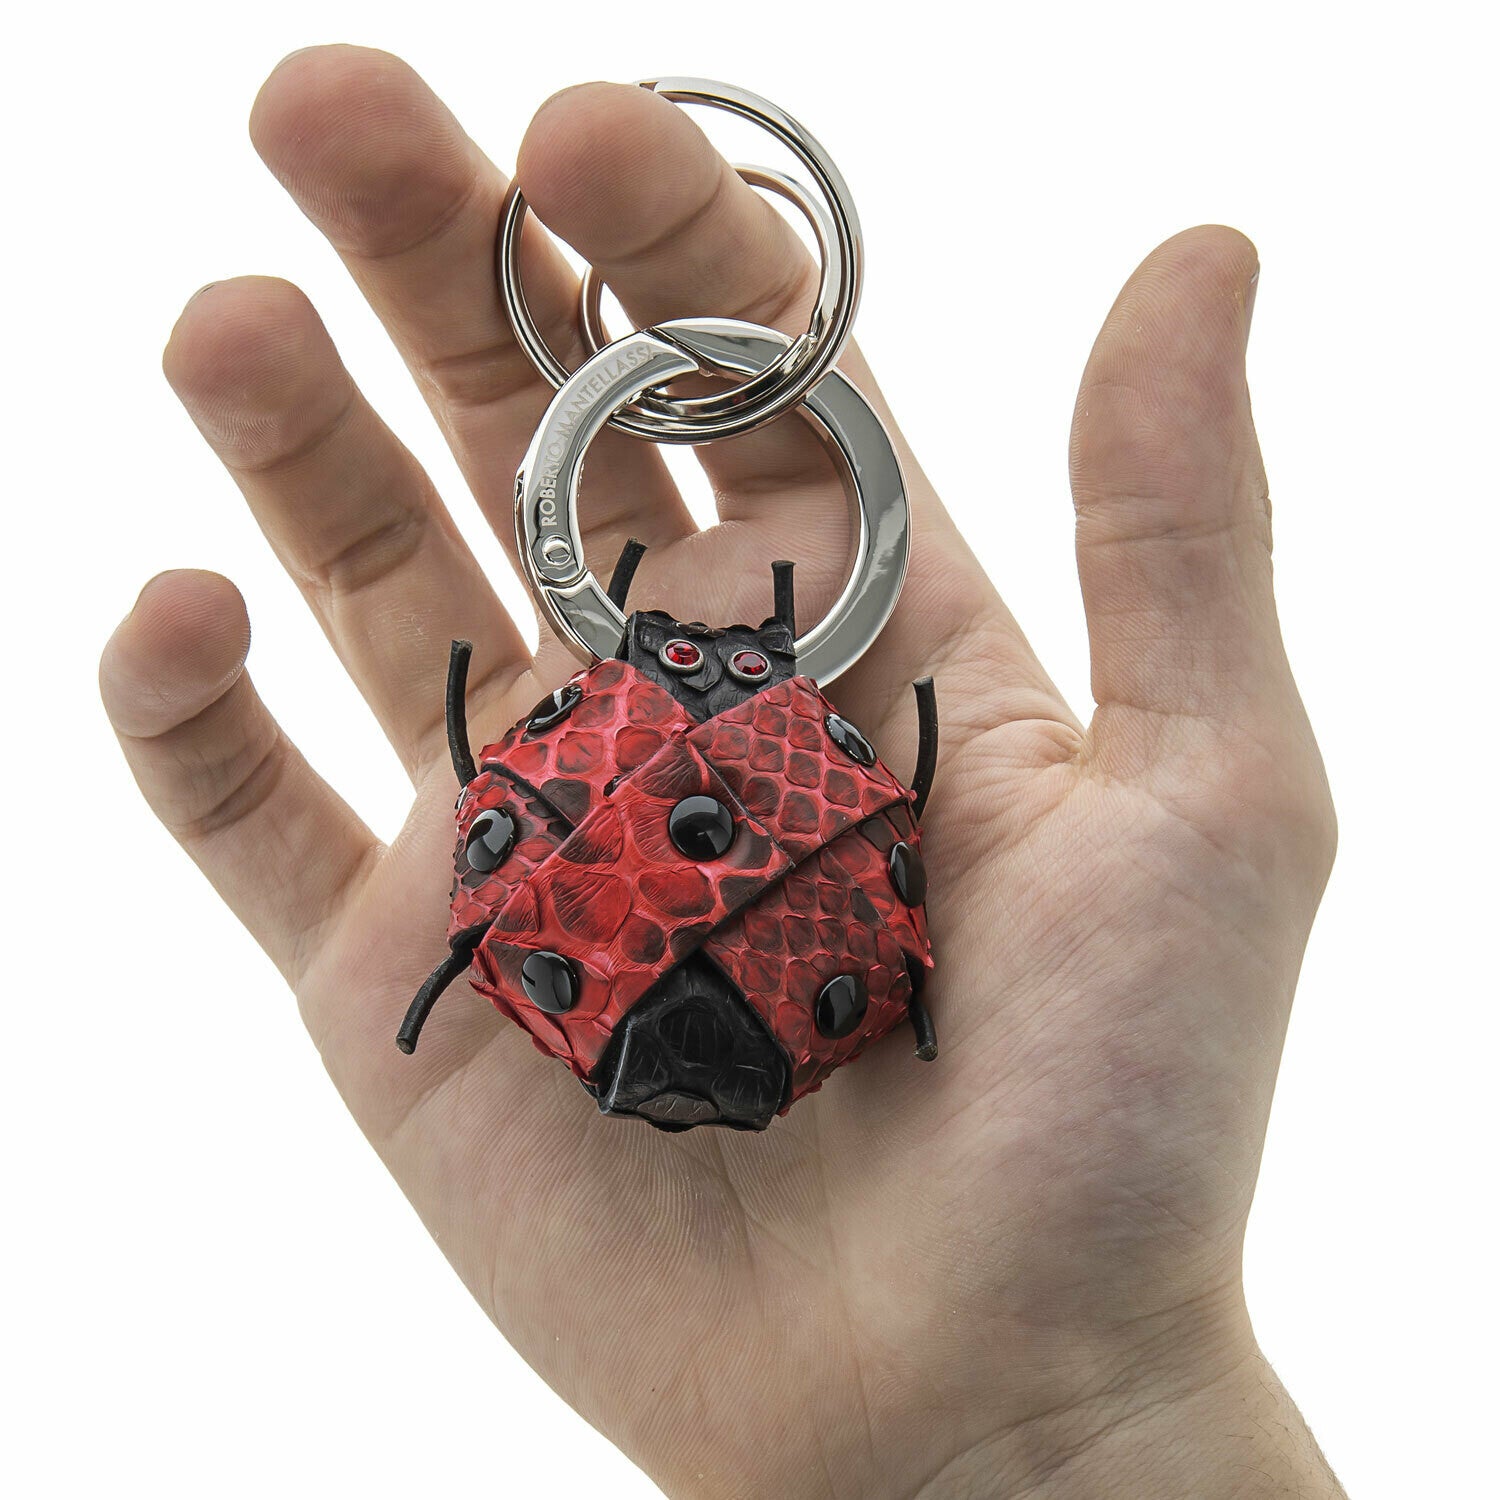 Real Reptile Keychain in the shape of a Ladybug